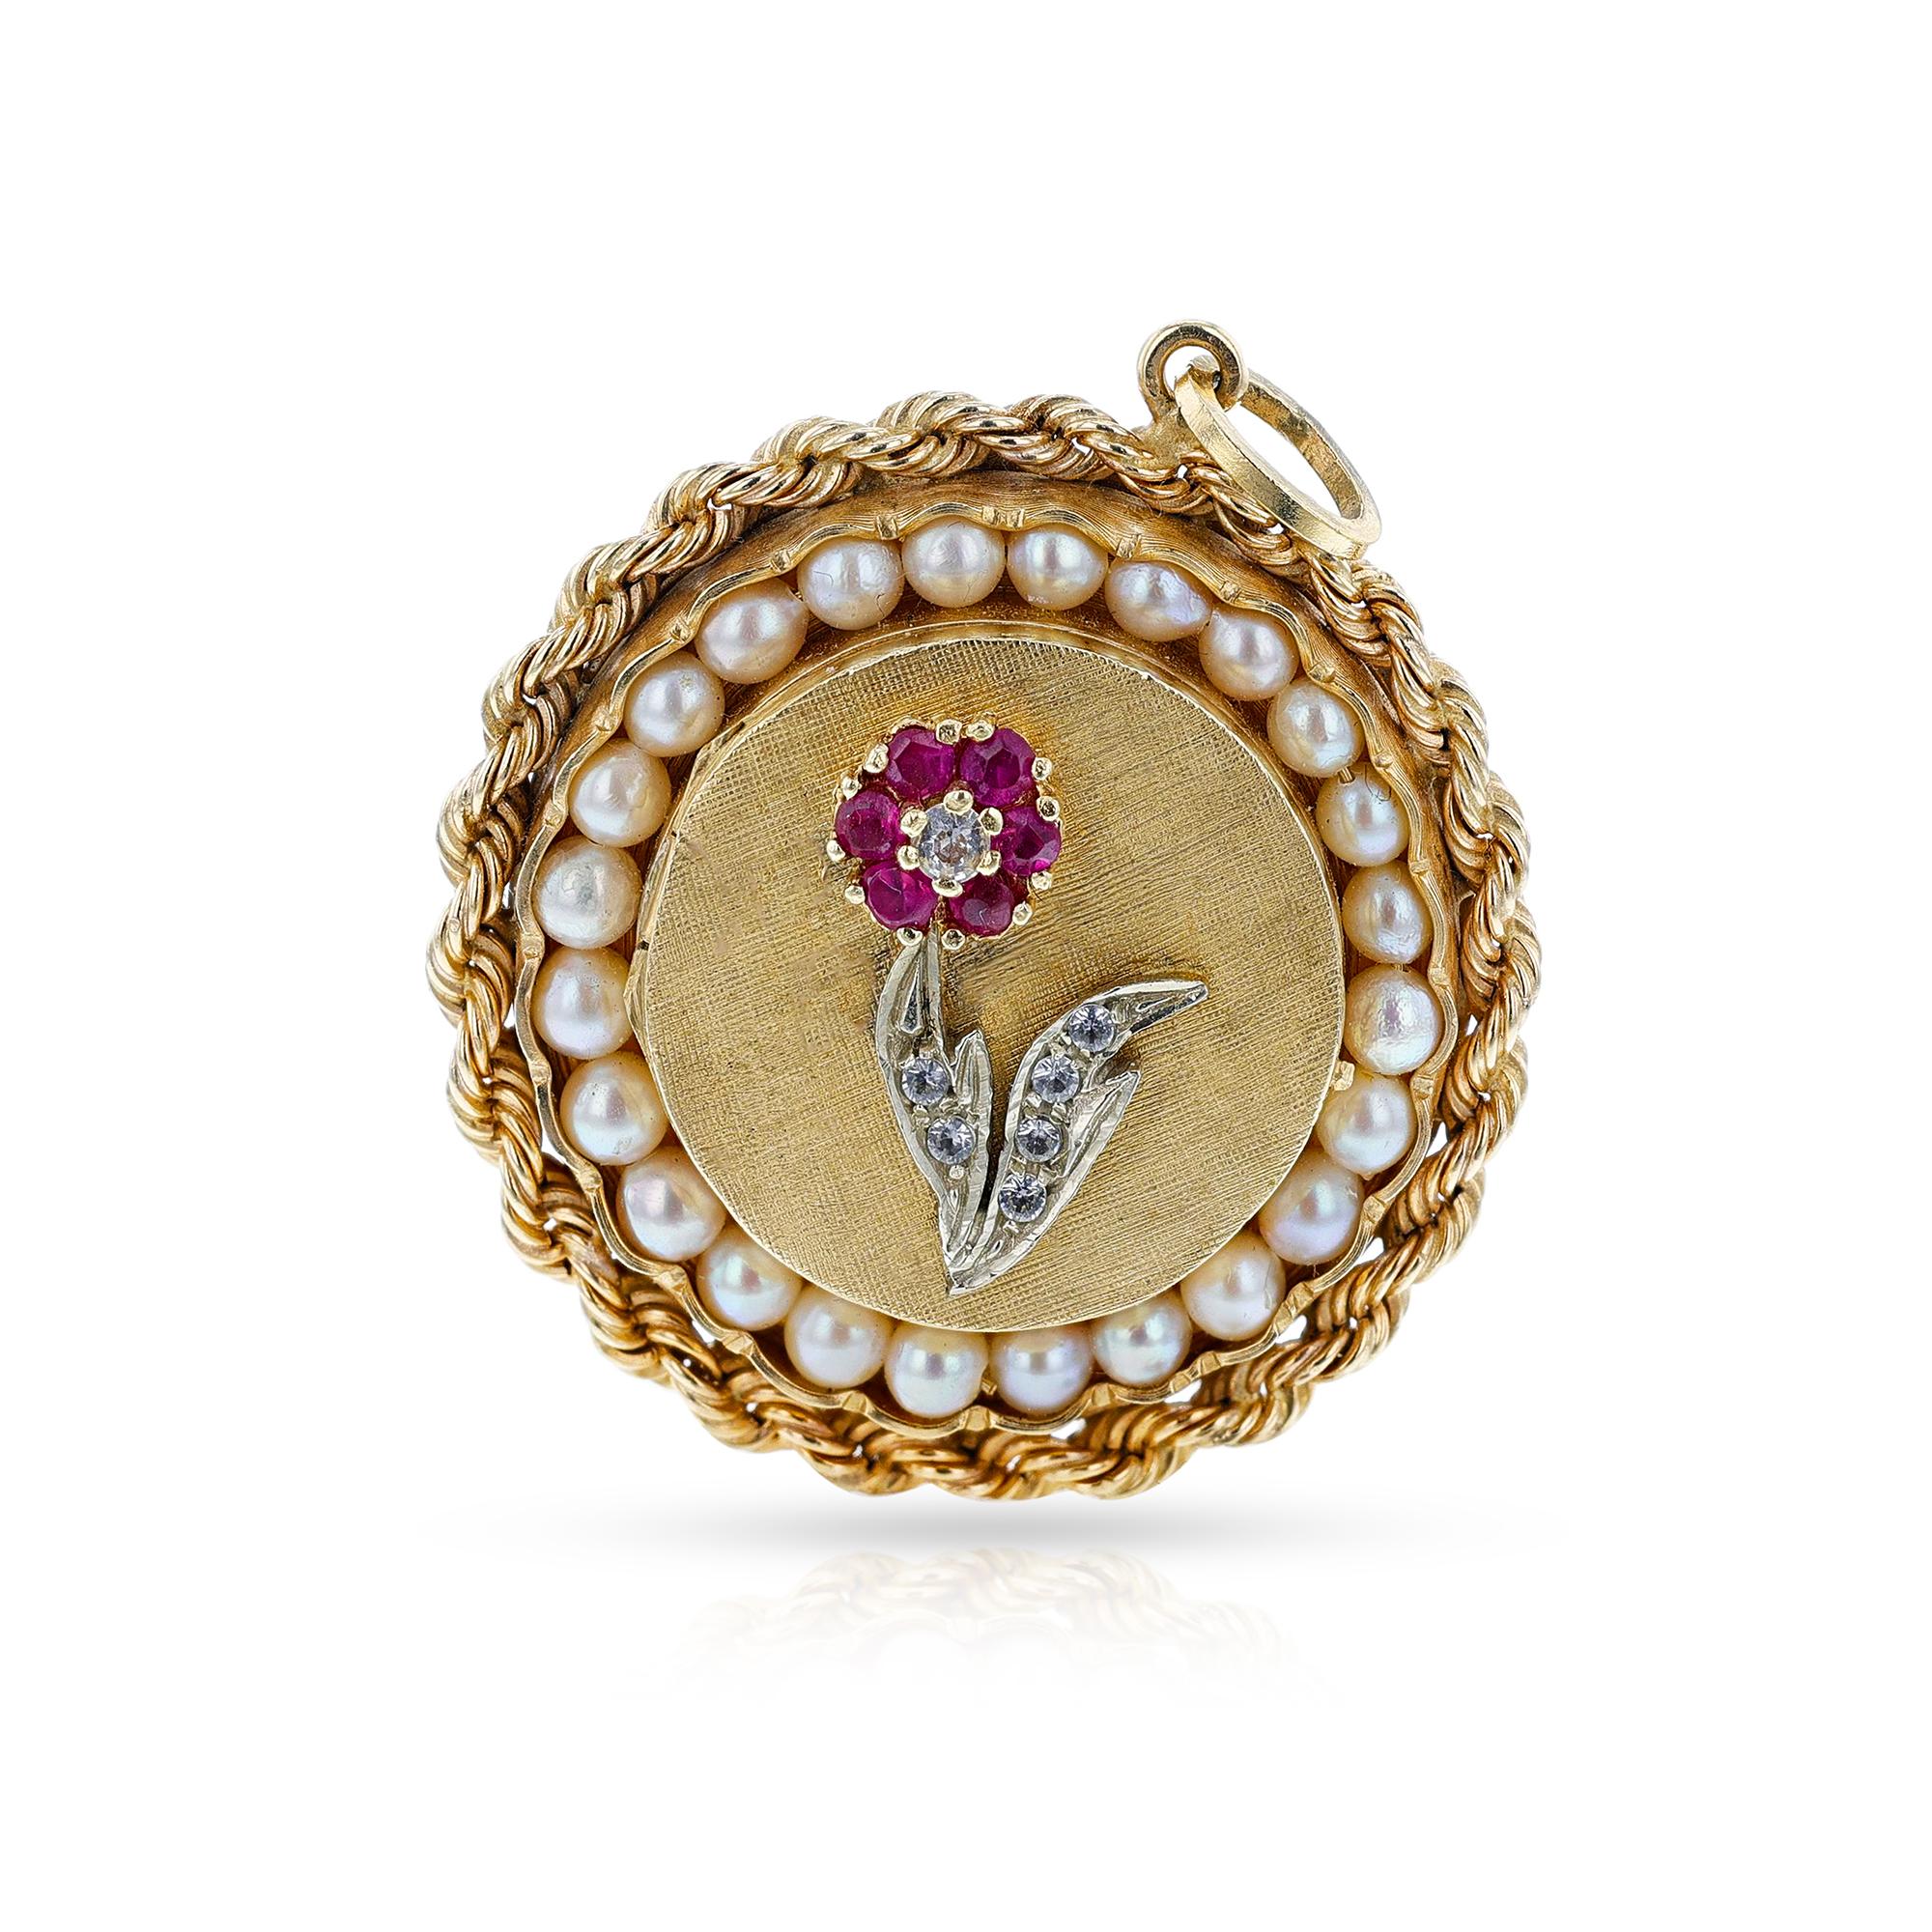 This sophisticated pendant and locket, crafted in 14k yellow gold with a total weight of 23.60 grams, comes with a statement ruby, cultured pearl, and diamond accents. This timeless piece measures 4MM and is sure to be an eye-catching addition to